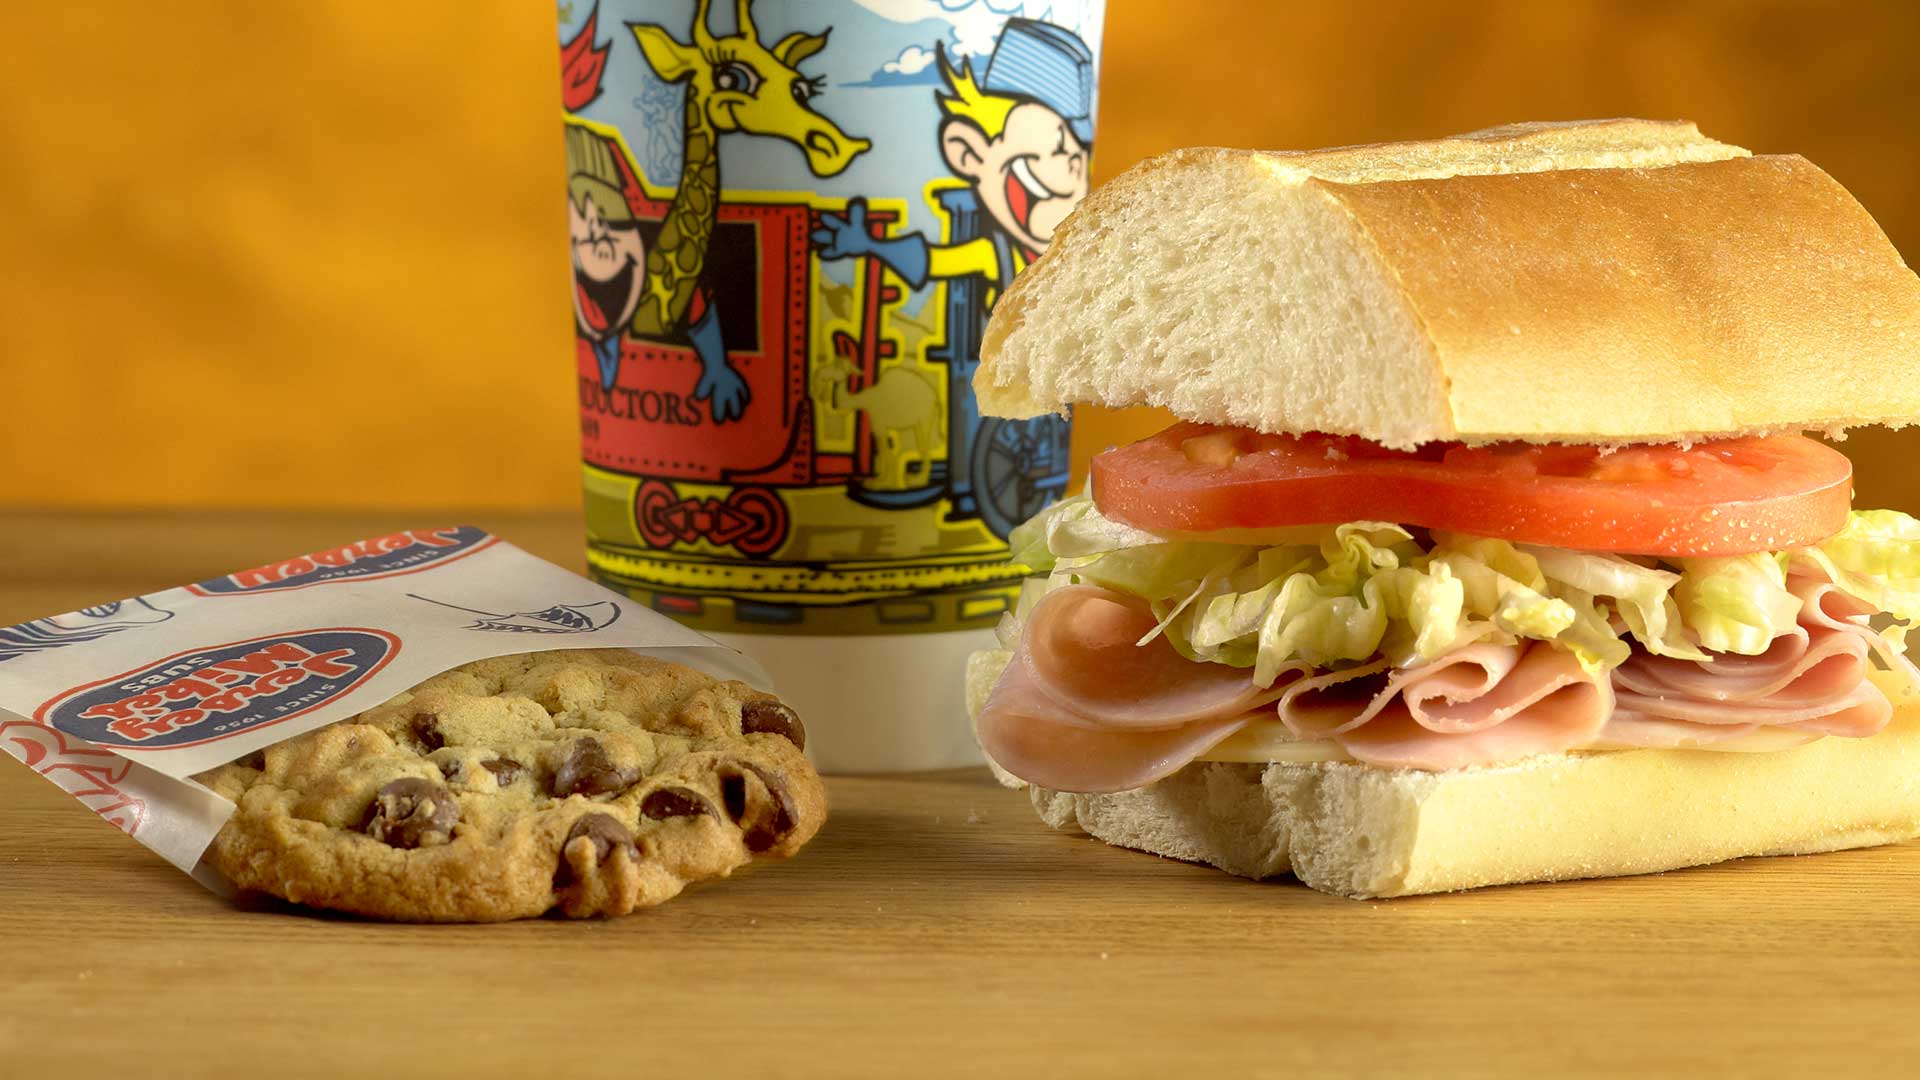 jersey mike online order